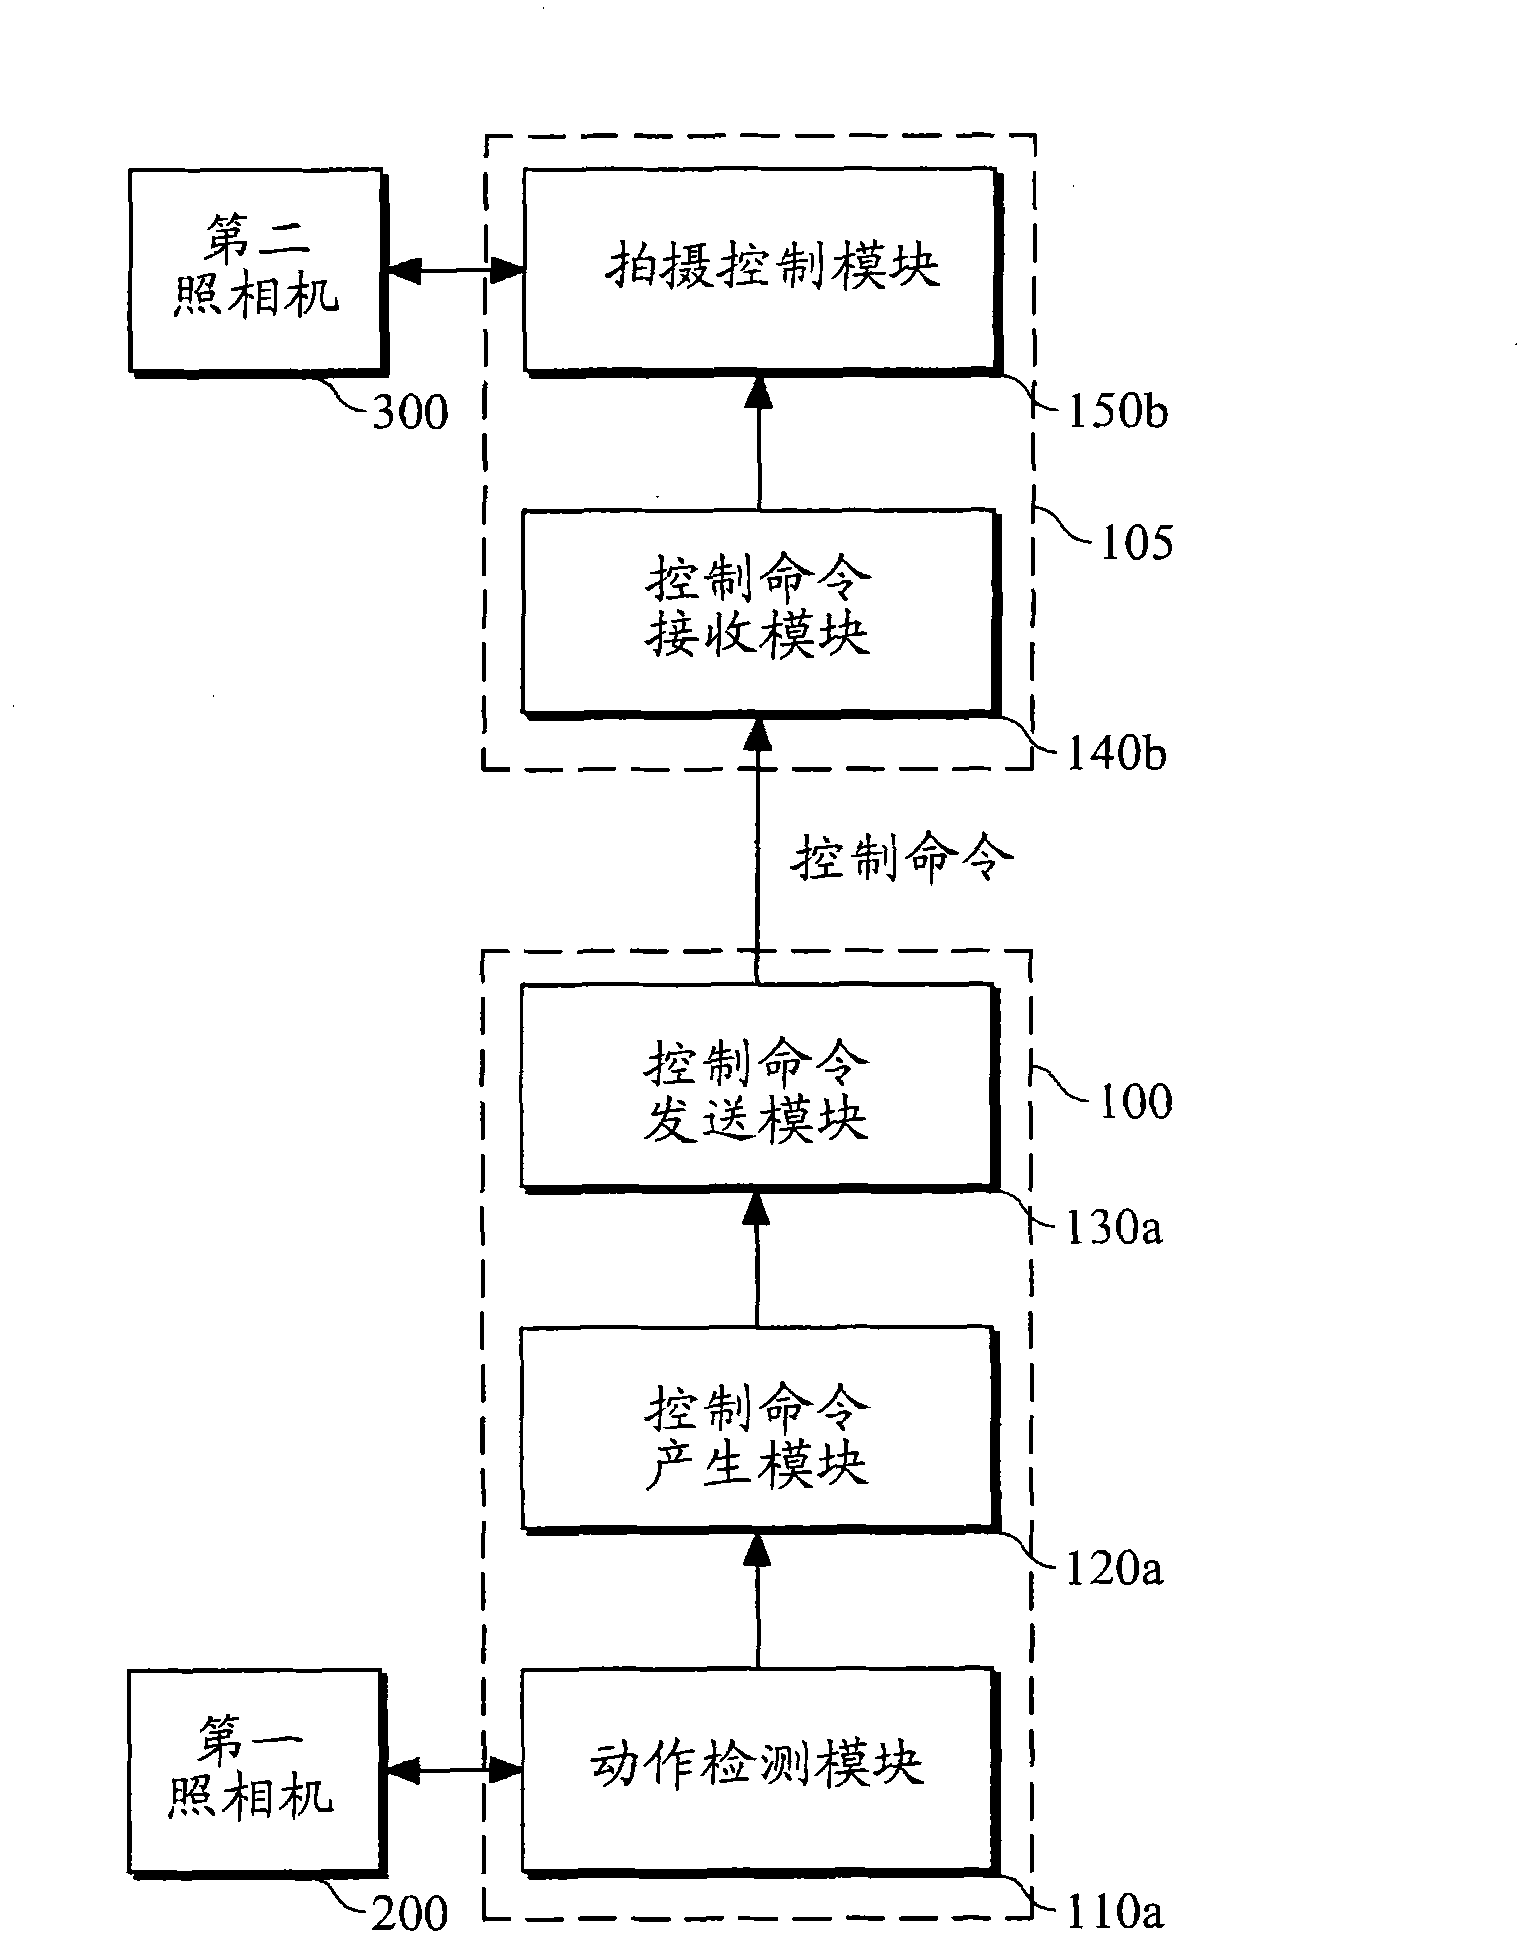 Mobile terminal having photographing control function and photographing control system